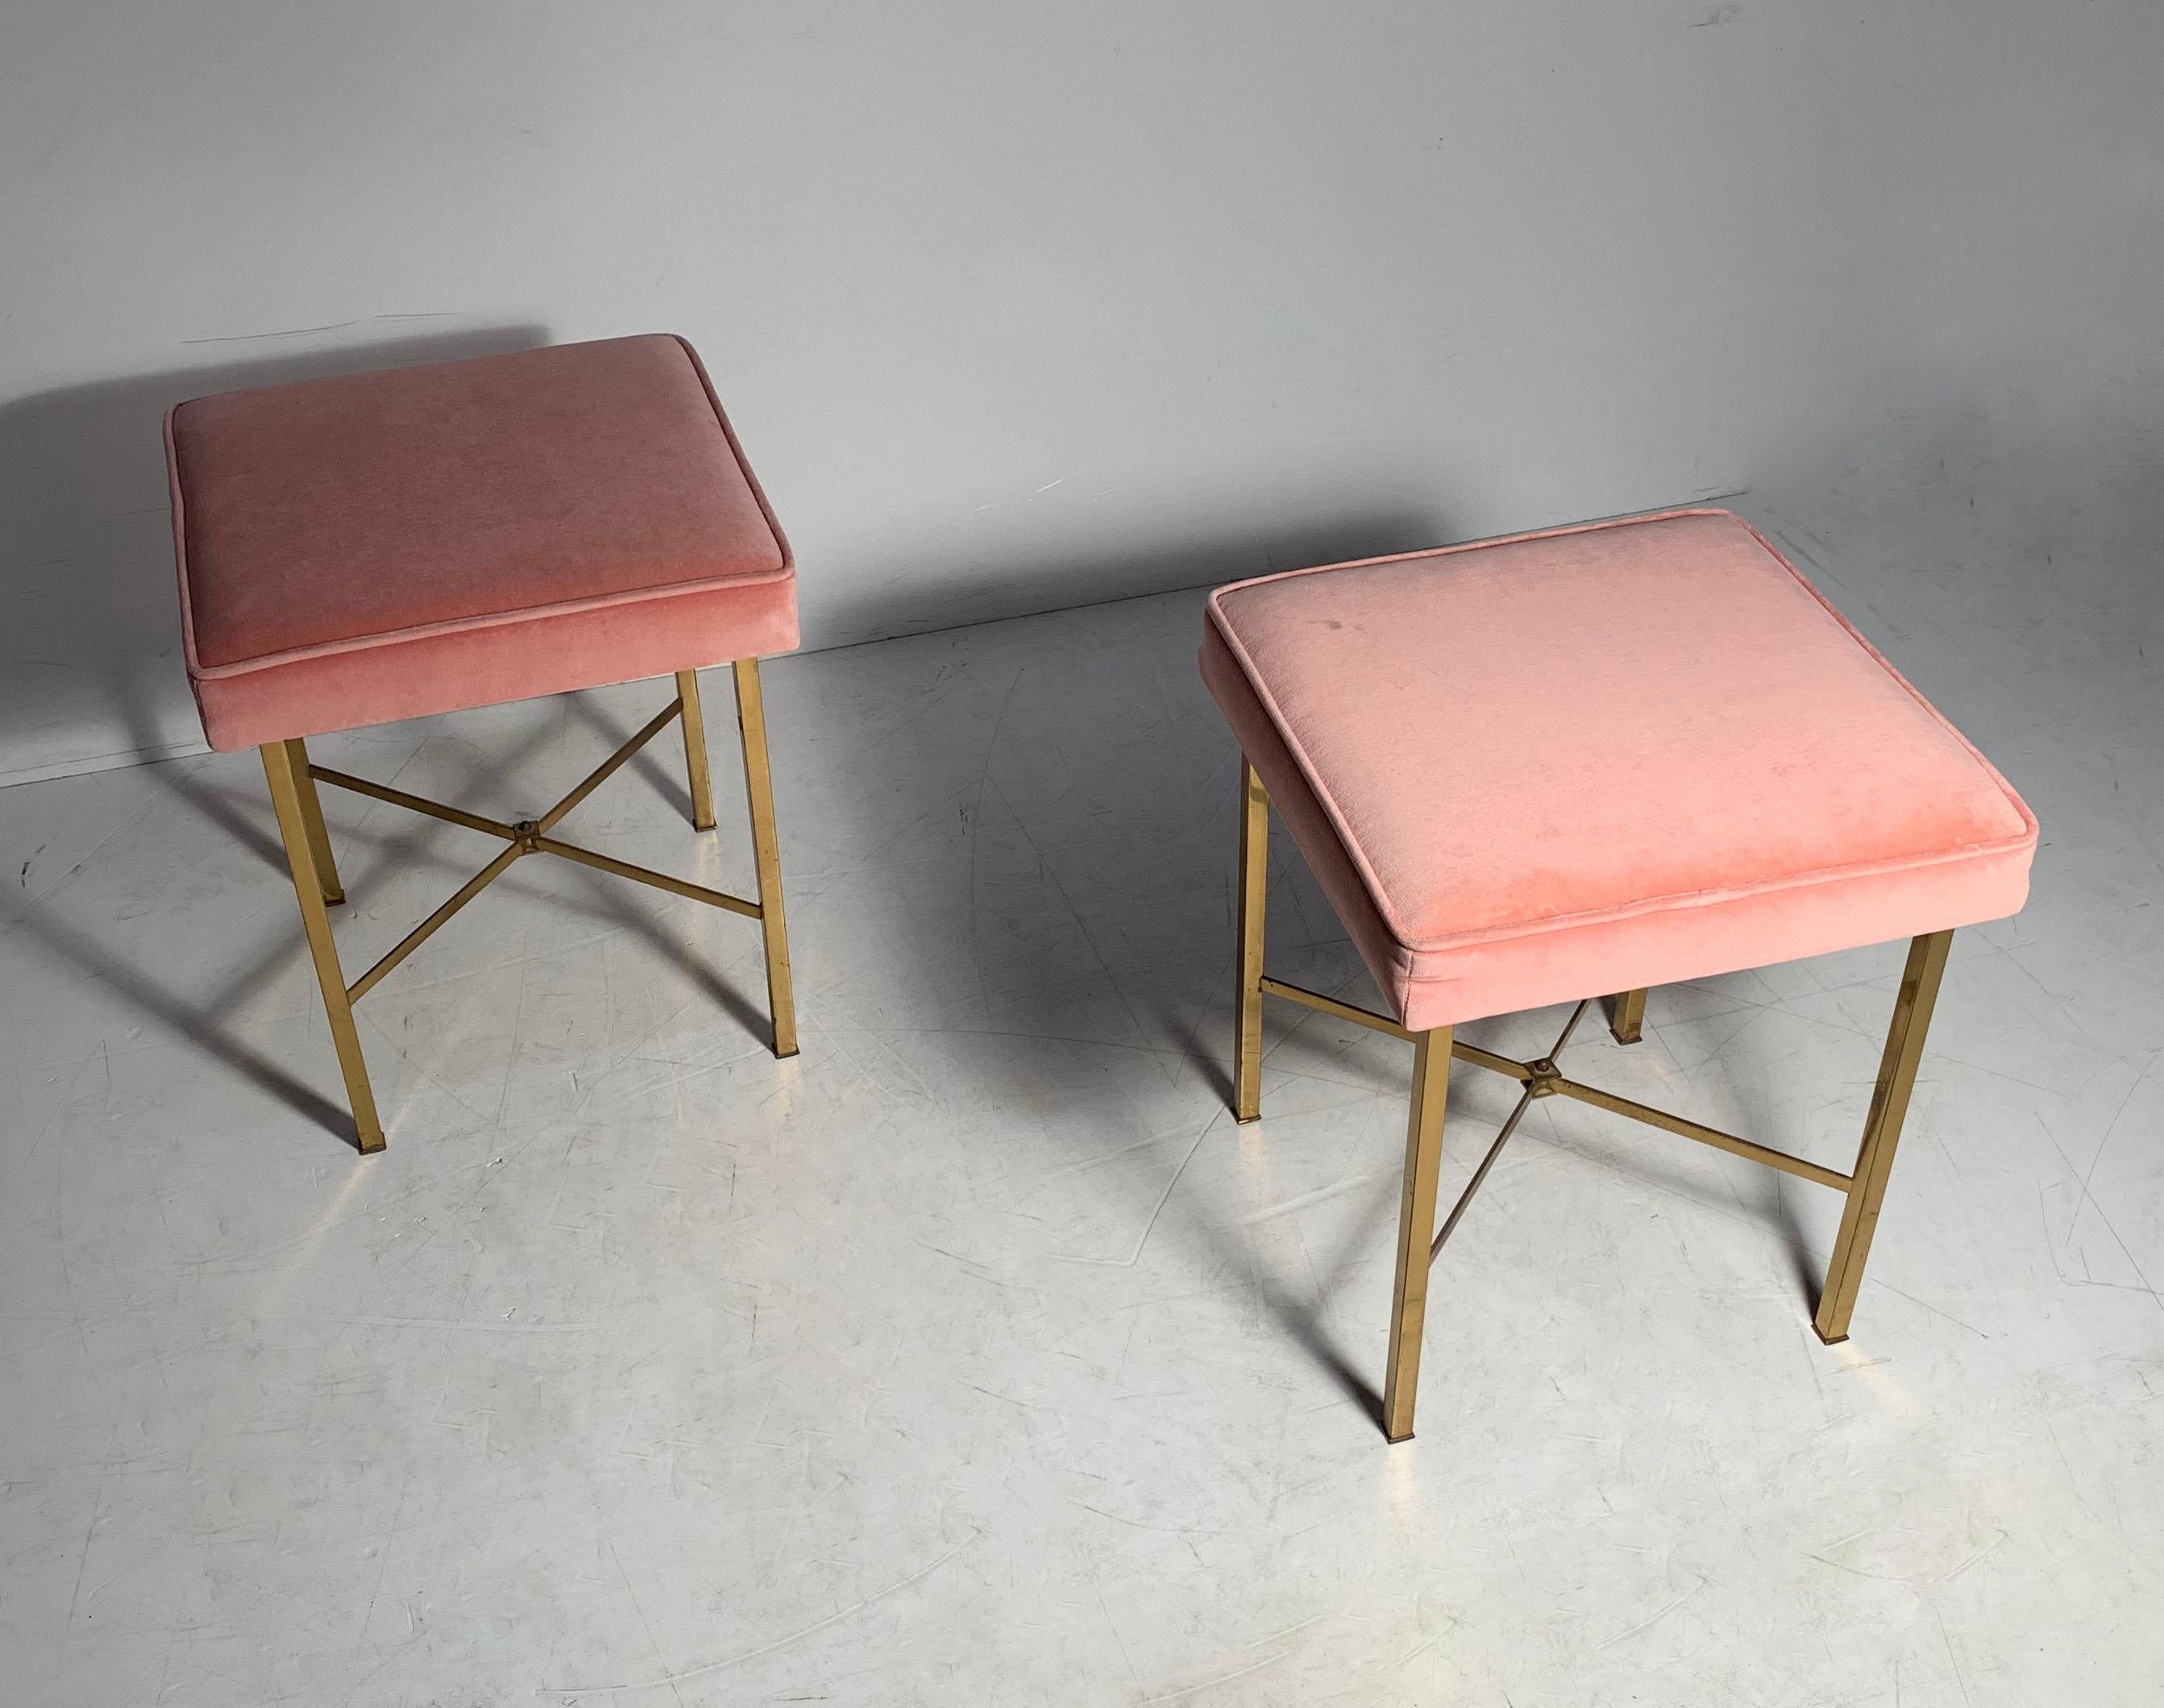 Pair of Mid-Century Modern stools in the manner of Paul McCobb. Could possibly be Italian.
Original pink fabric that was preserved under plastic. There is a spot (stain) on one of them though.